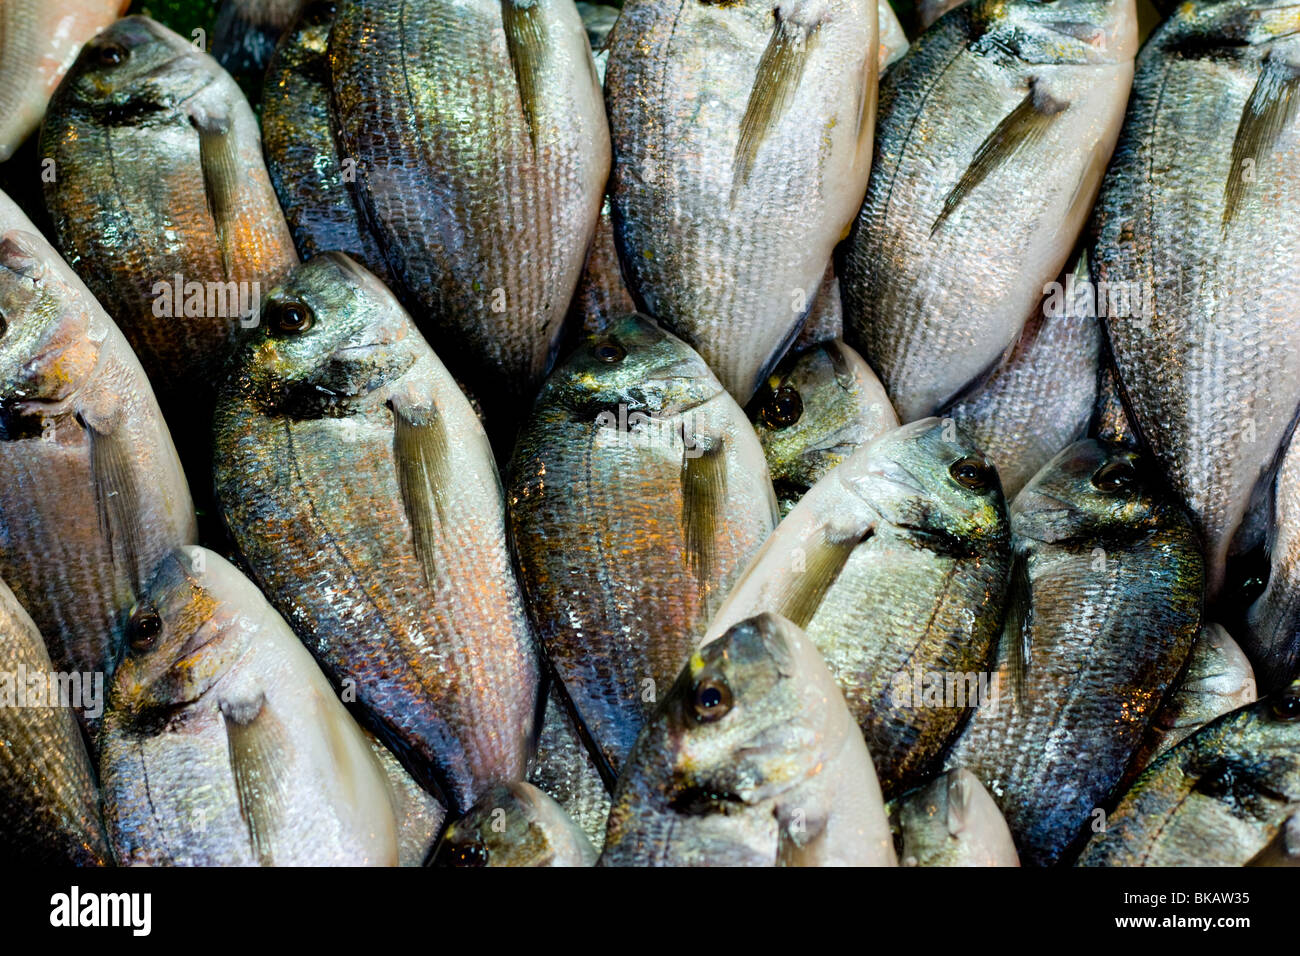 Fish for sale at a market in Istanbul Stock Photo